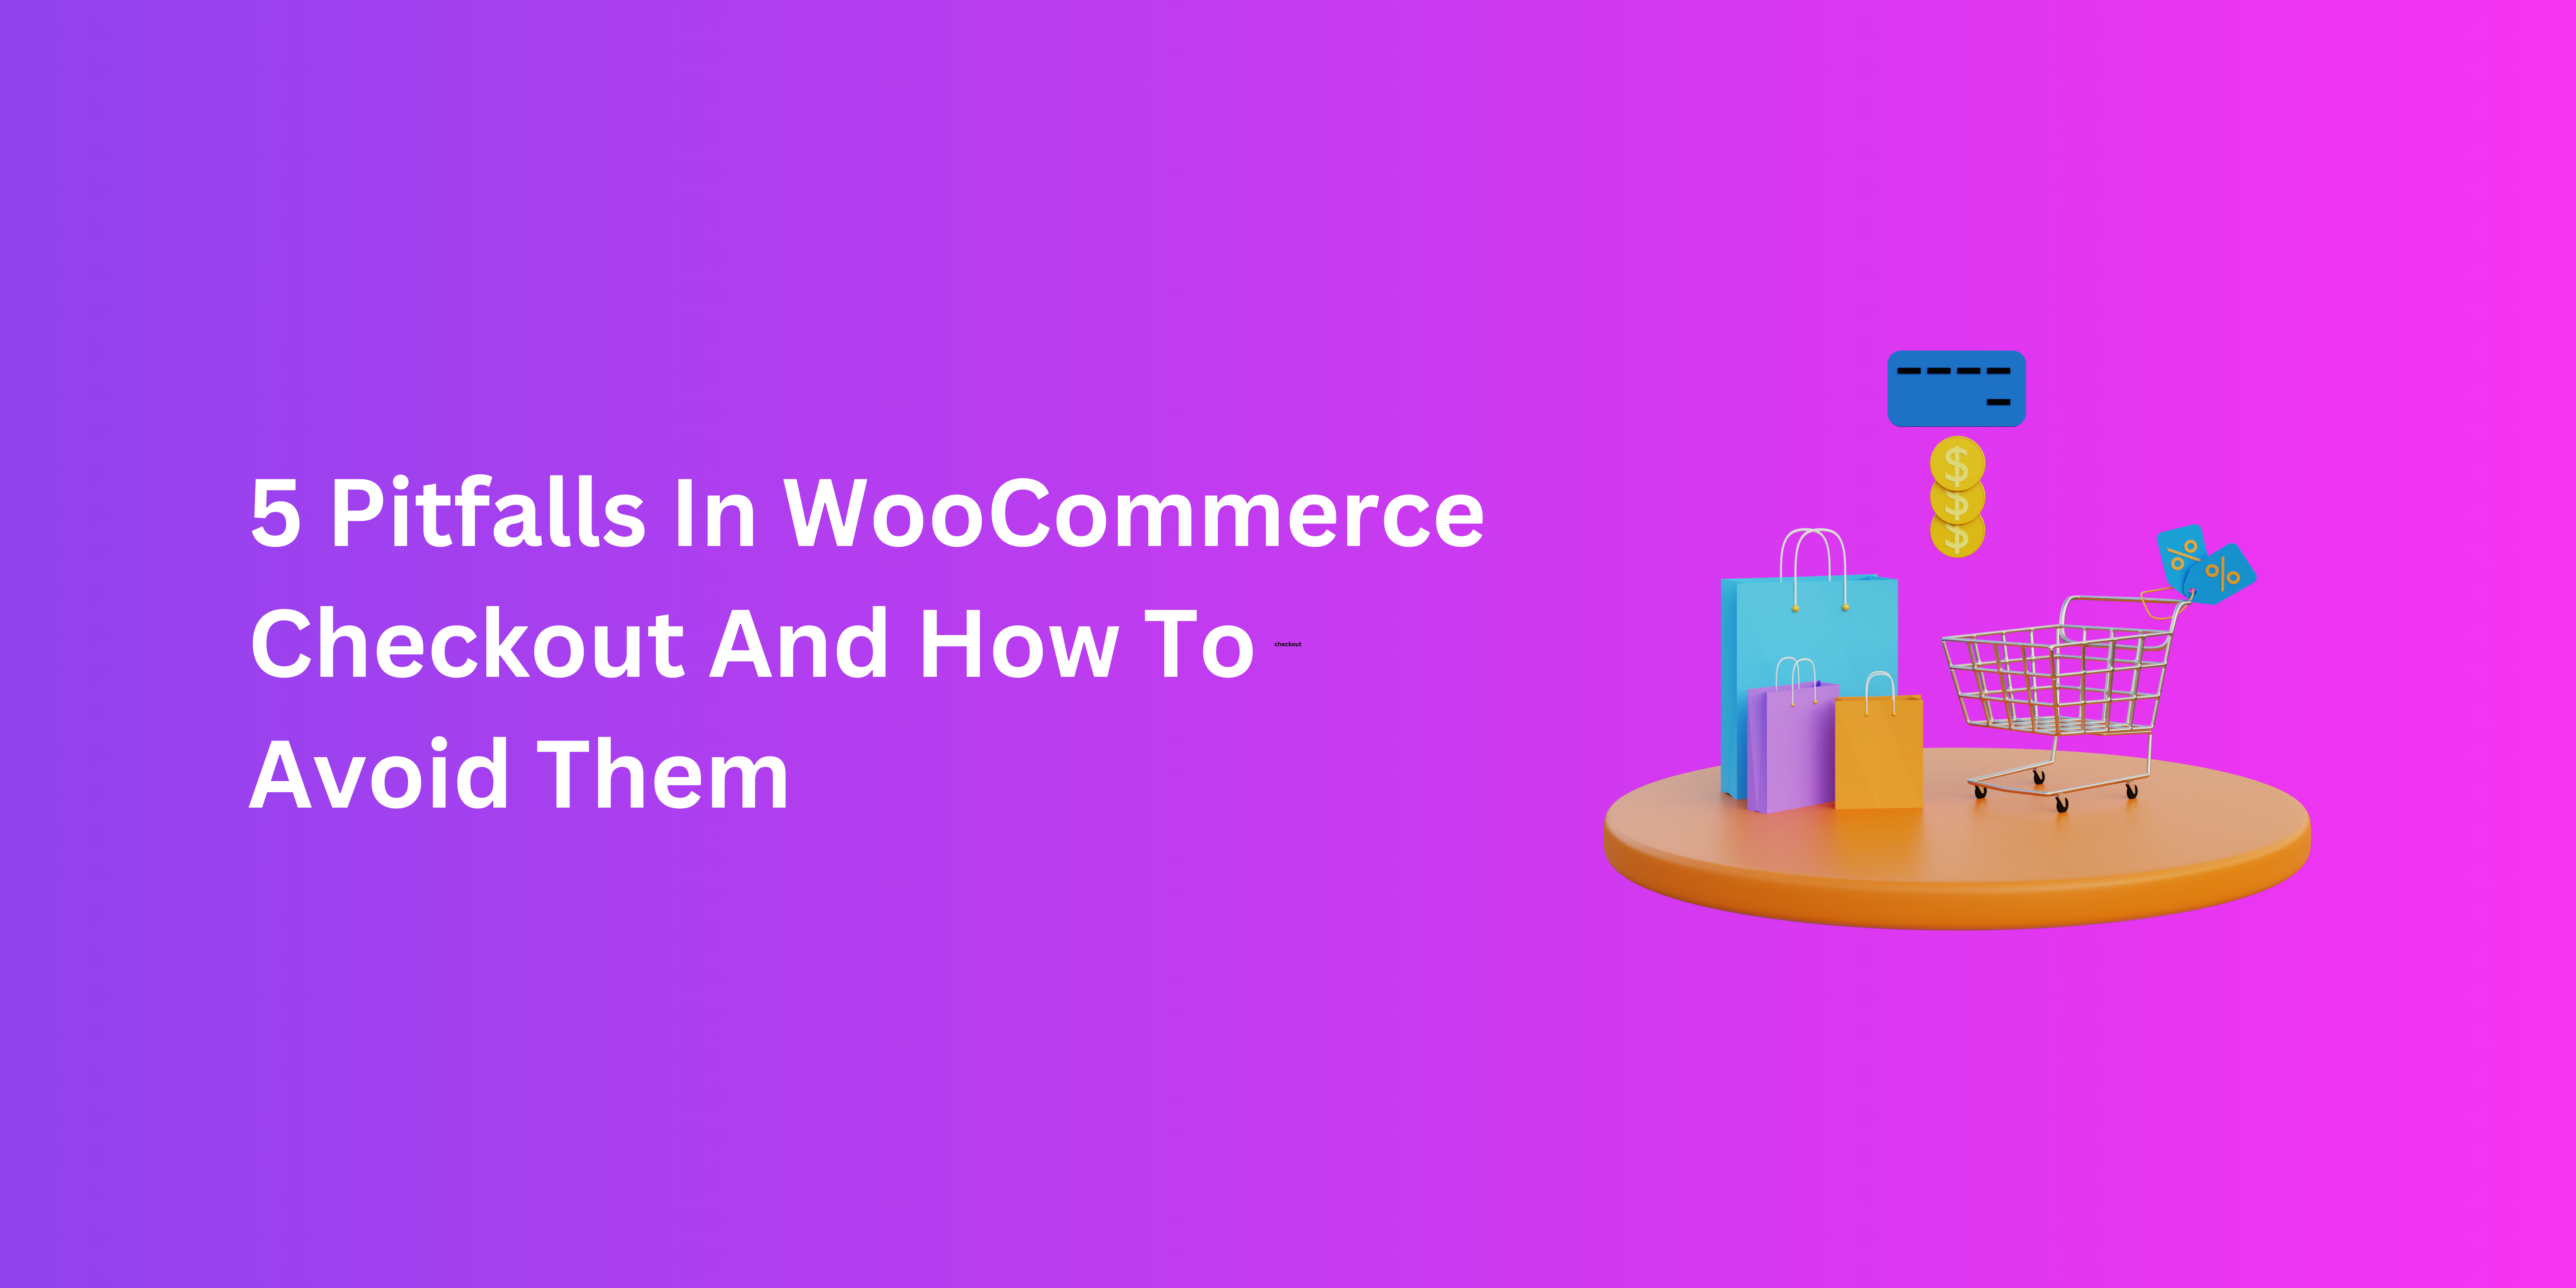 5 pitfalls in woocommerce checkout